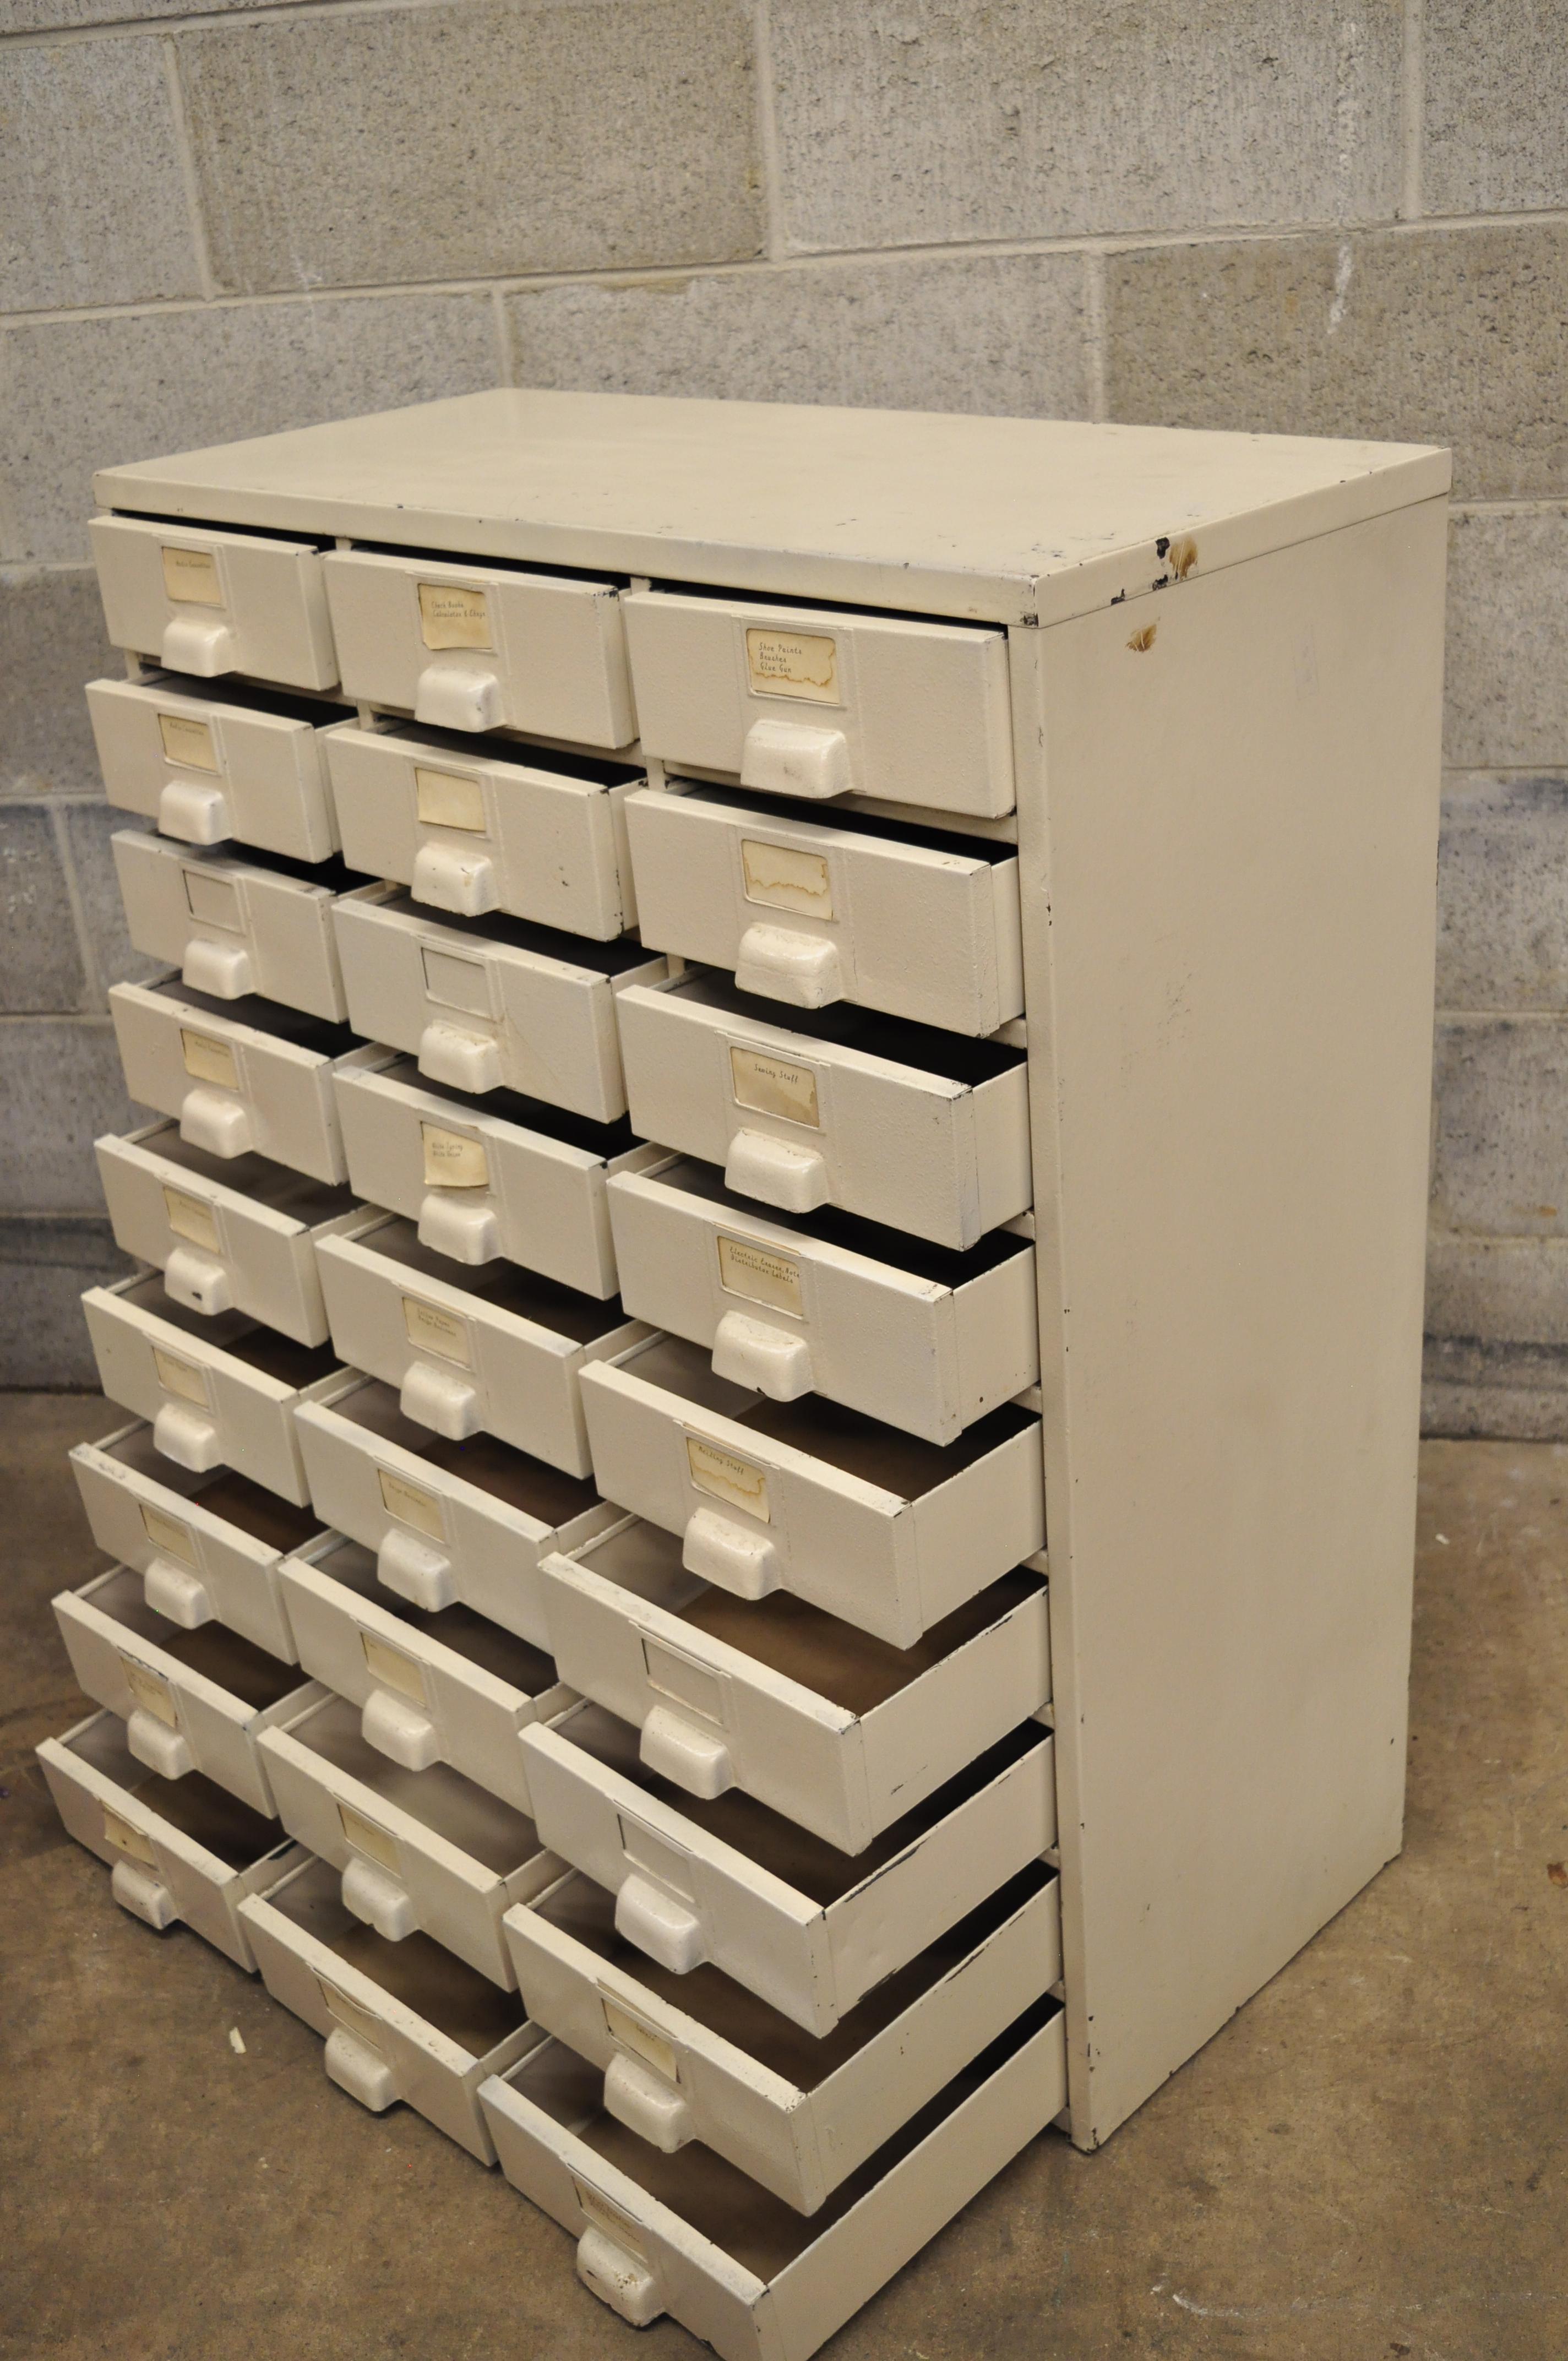 Antique American Industrial steel metal 27 drawer tool shop storage cabinet. Item features 27 drawers, steel metal construction, beige painted finish, very nice vintage item, quality American craftsmanship, circa mid-20th century. Measurements: 37